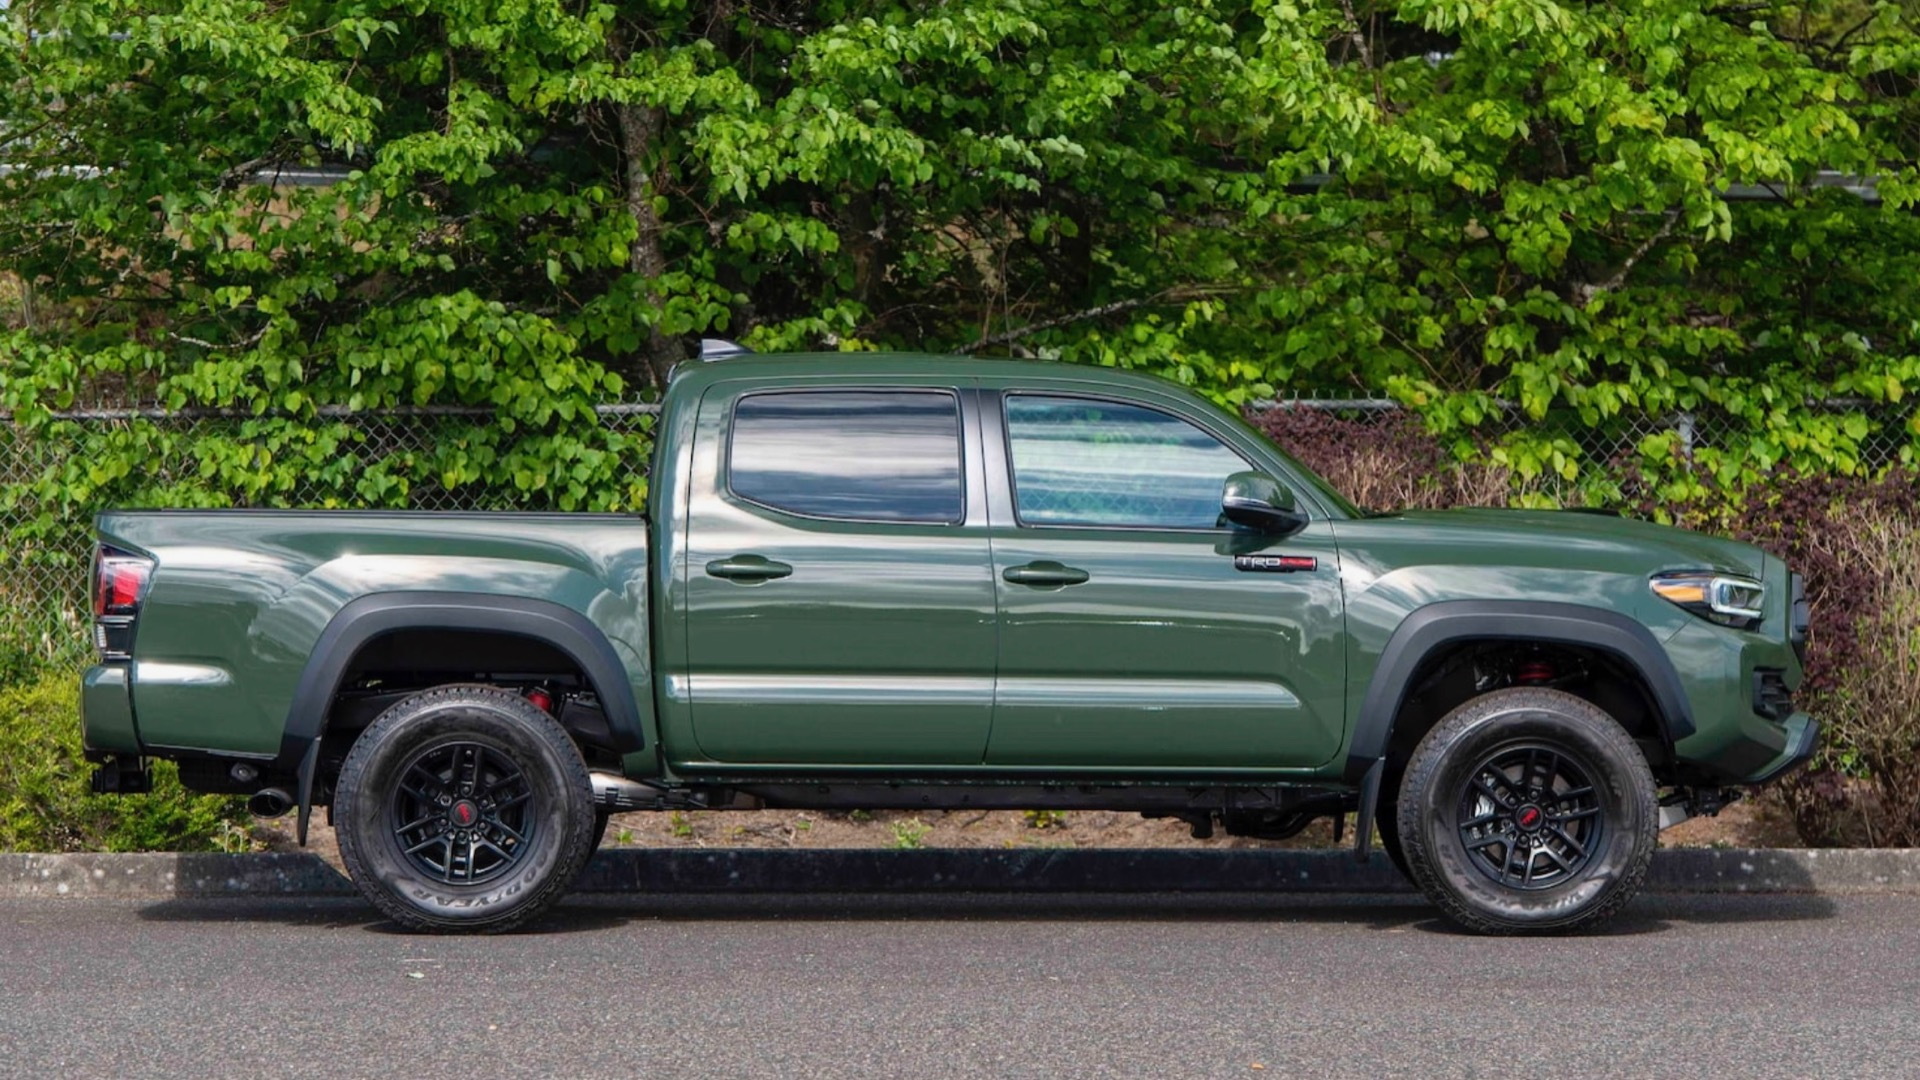 2020 Toyota Tacoma TRD Pro - One millionth Tacoma built (Photo by Mecum Auctions)